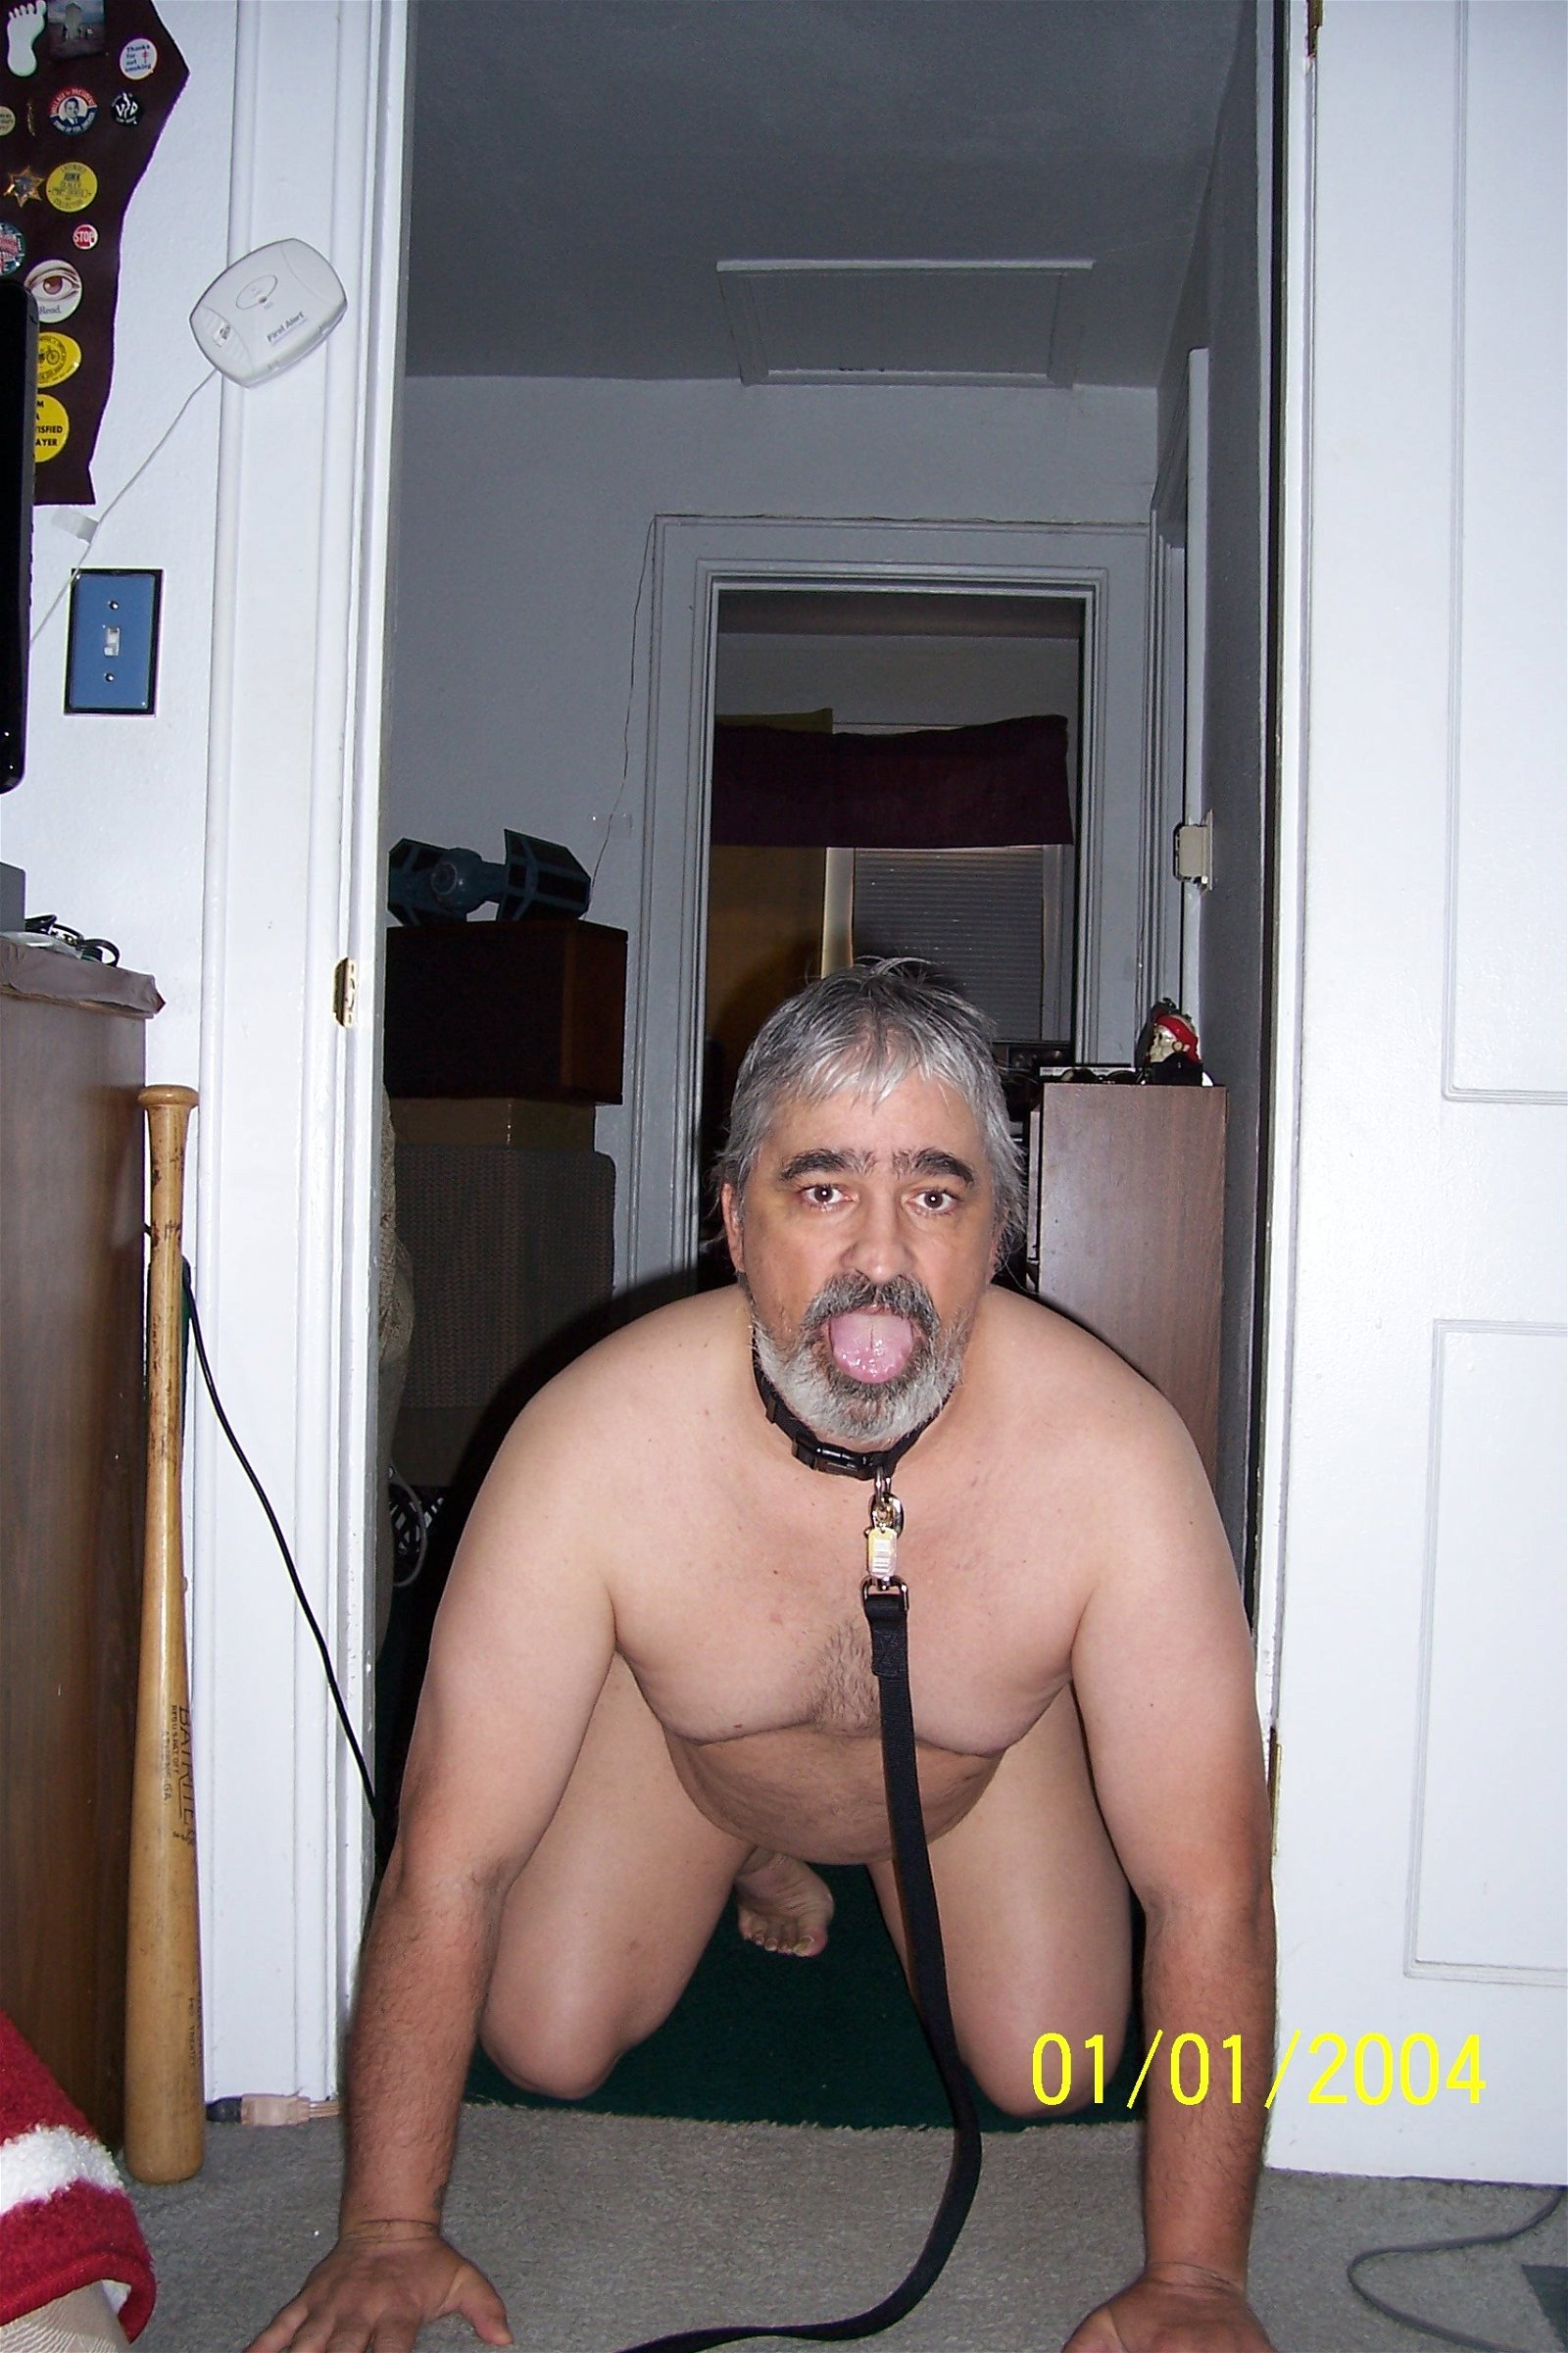 Photo by Sparkle with the username @Kevindogslave, who is a verified user,  February 26, 2019 at 9:16 PM. The post is about the topic Fat men who want to be dogs